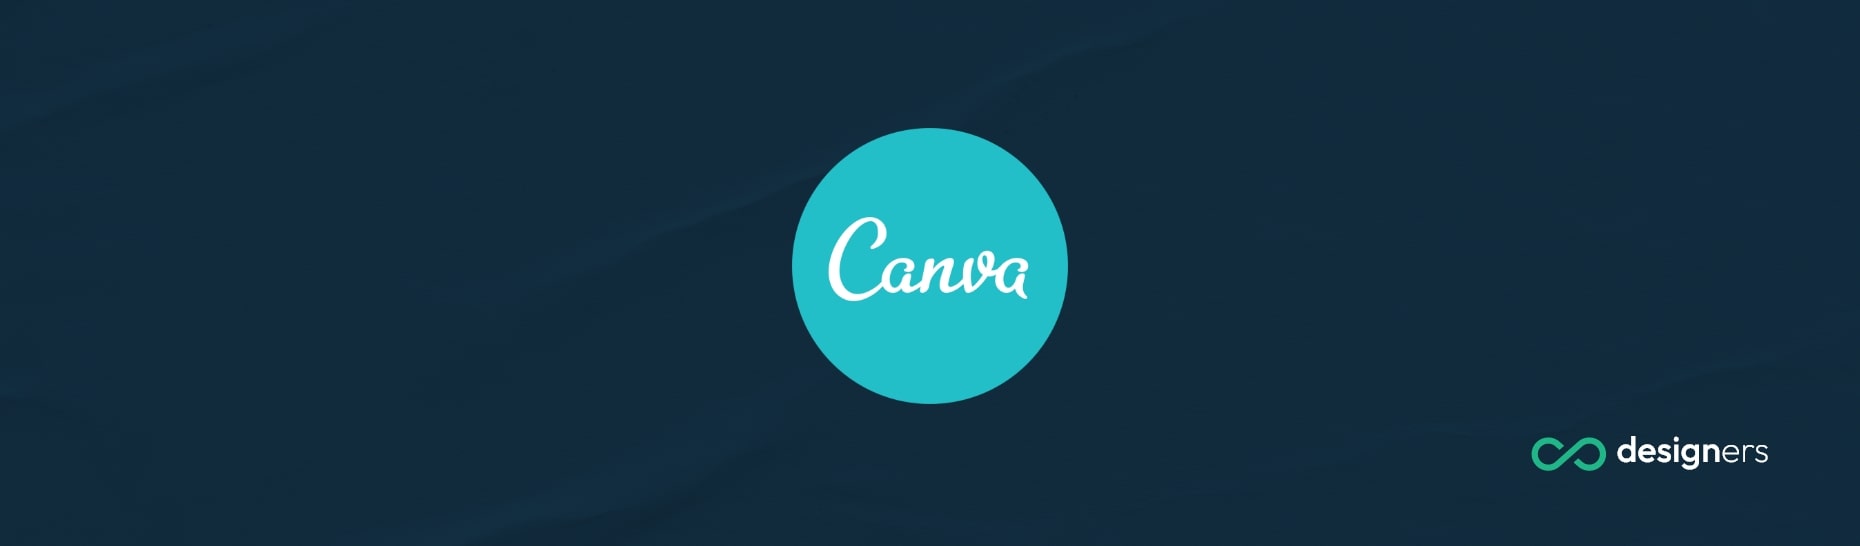 What Happened to Canva Data Breach?